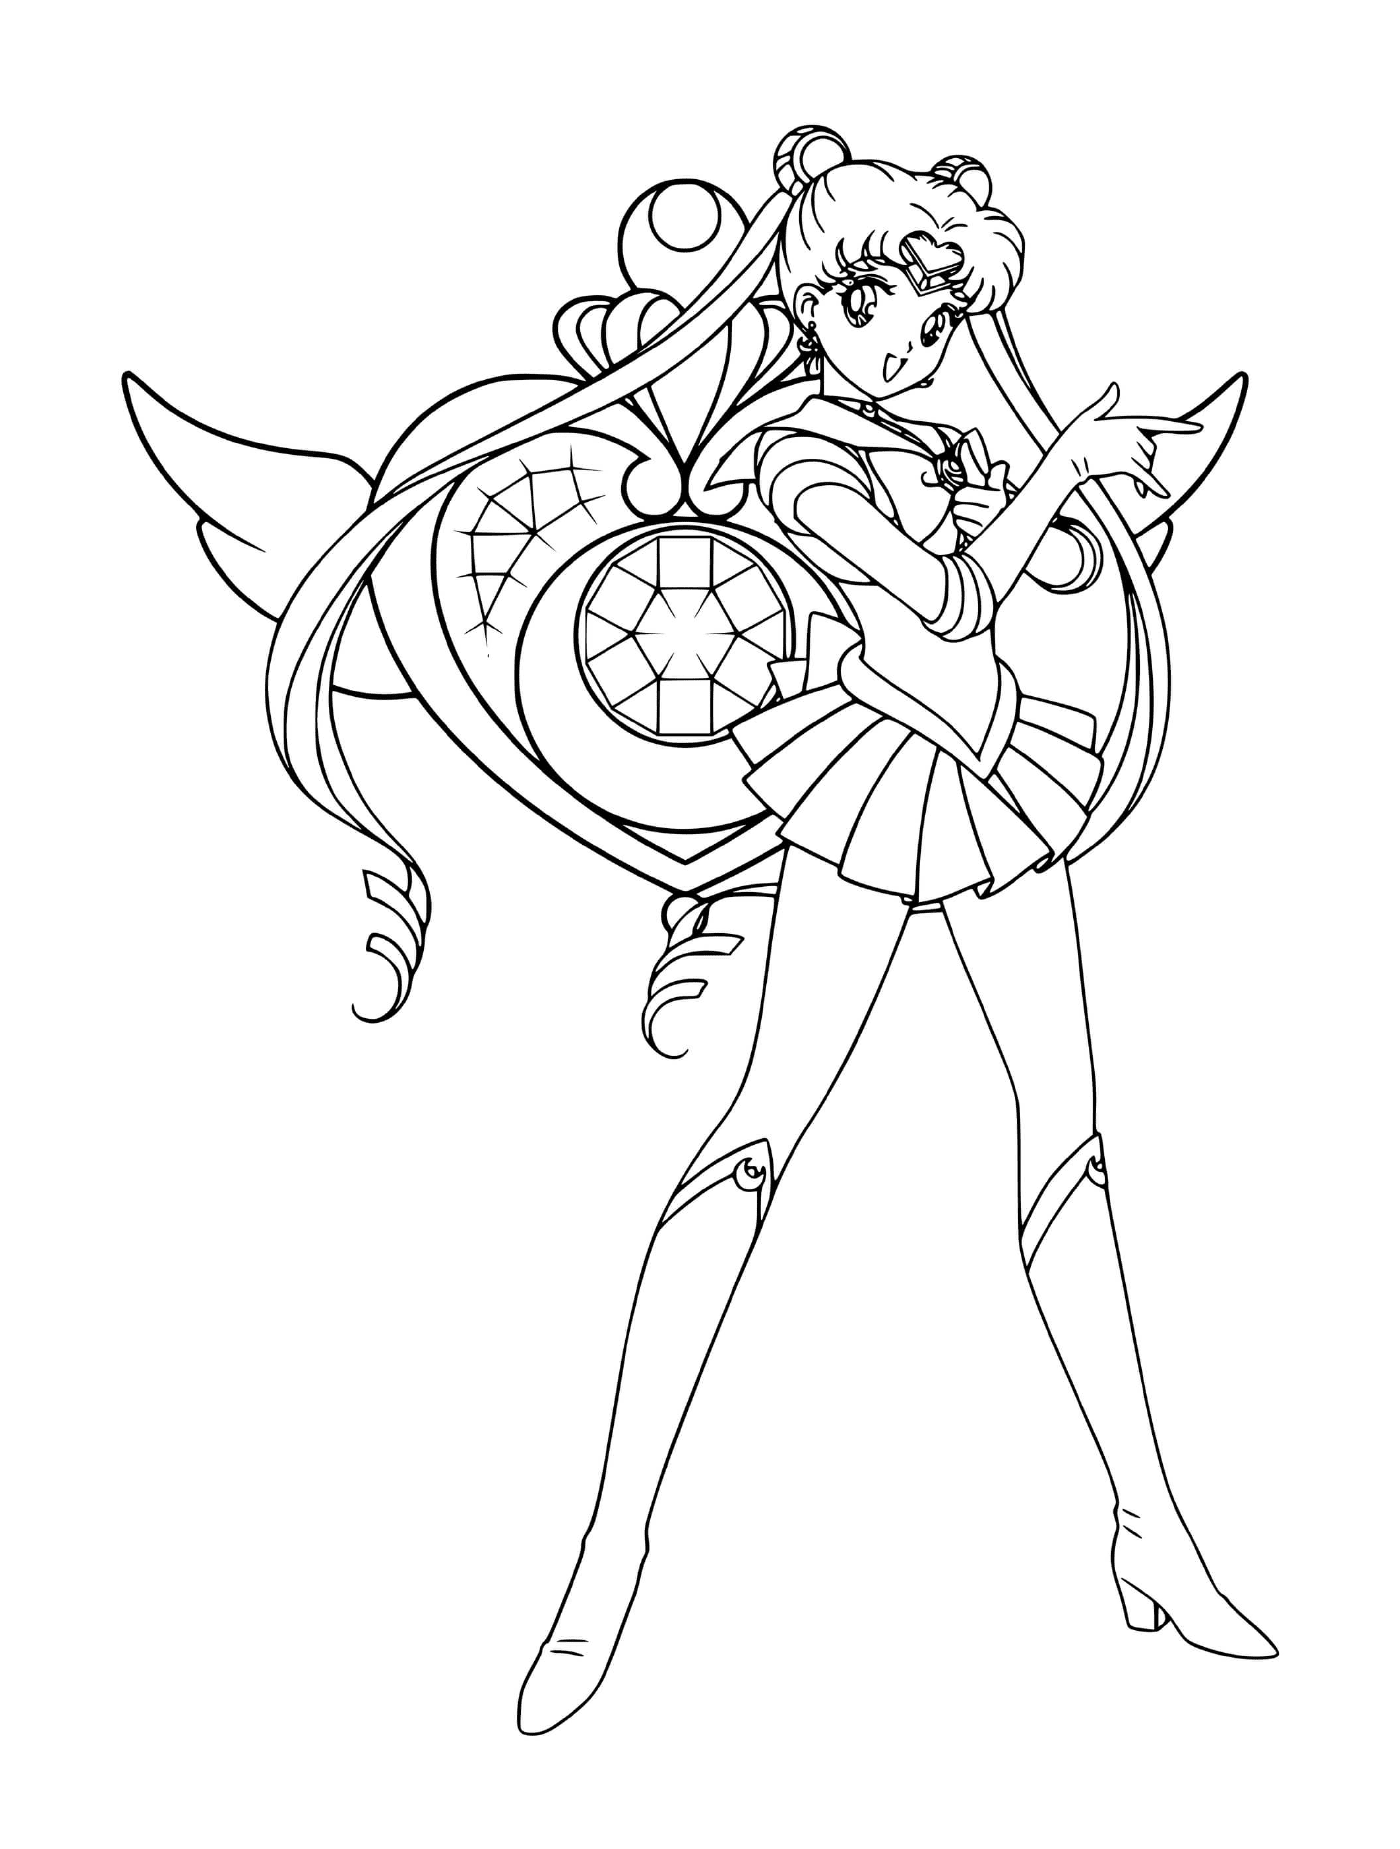 Sailor Moon Coloring Pages: 36 Printable Drawings